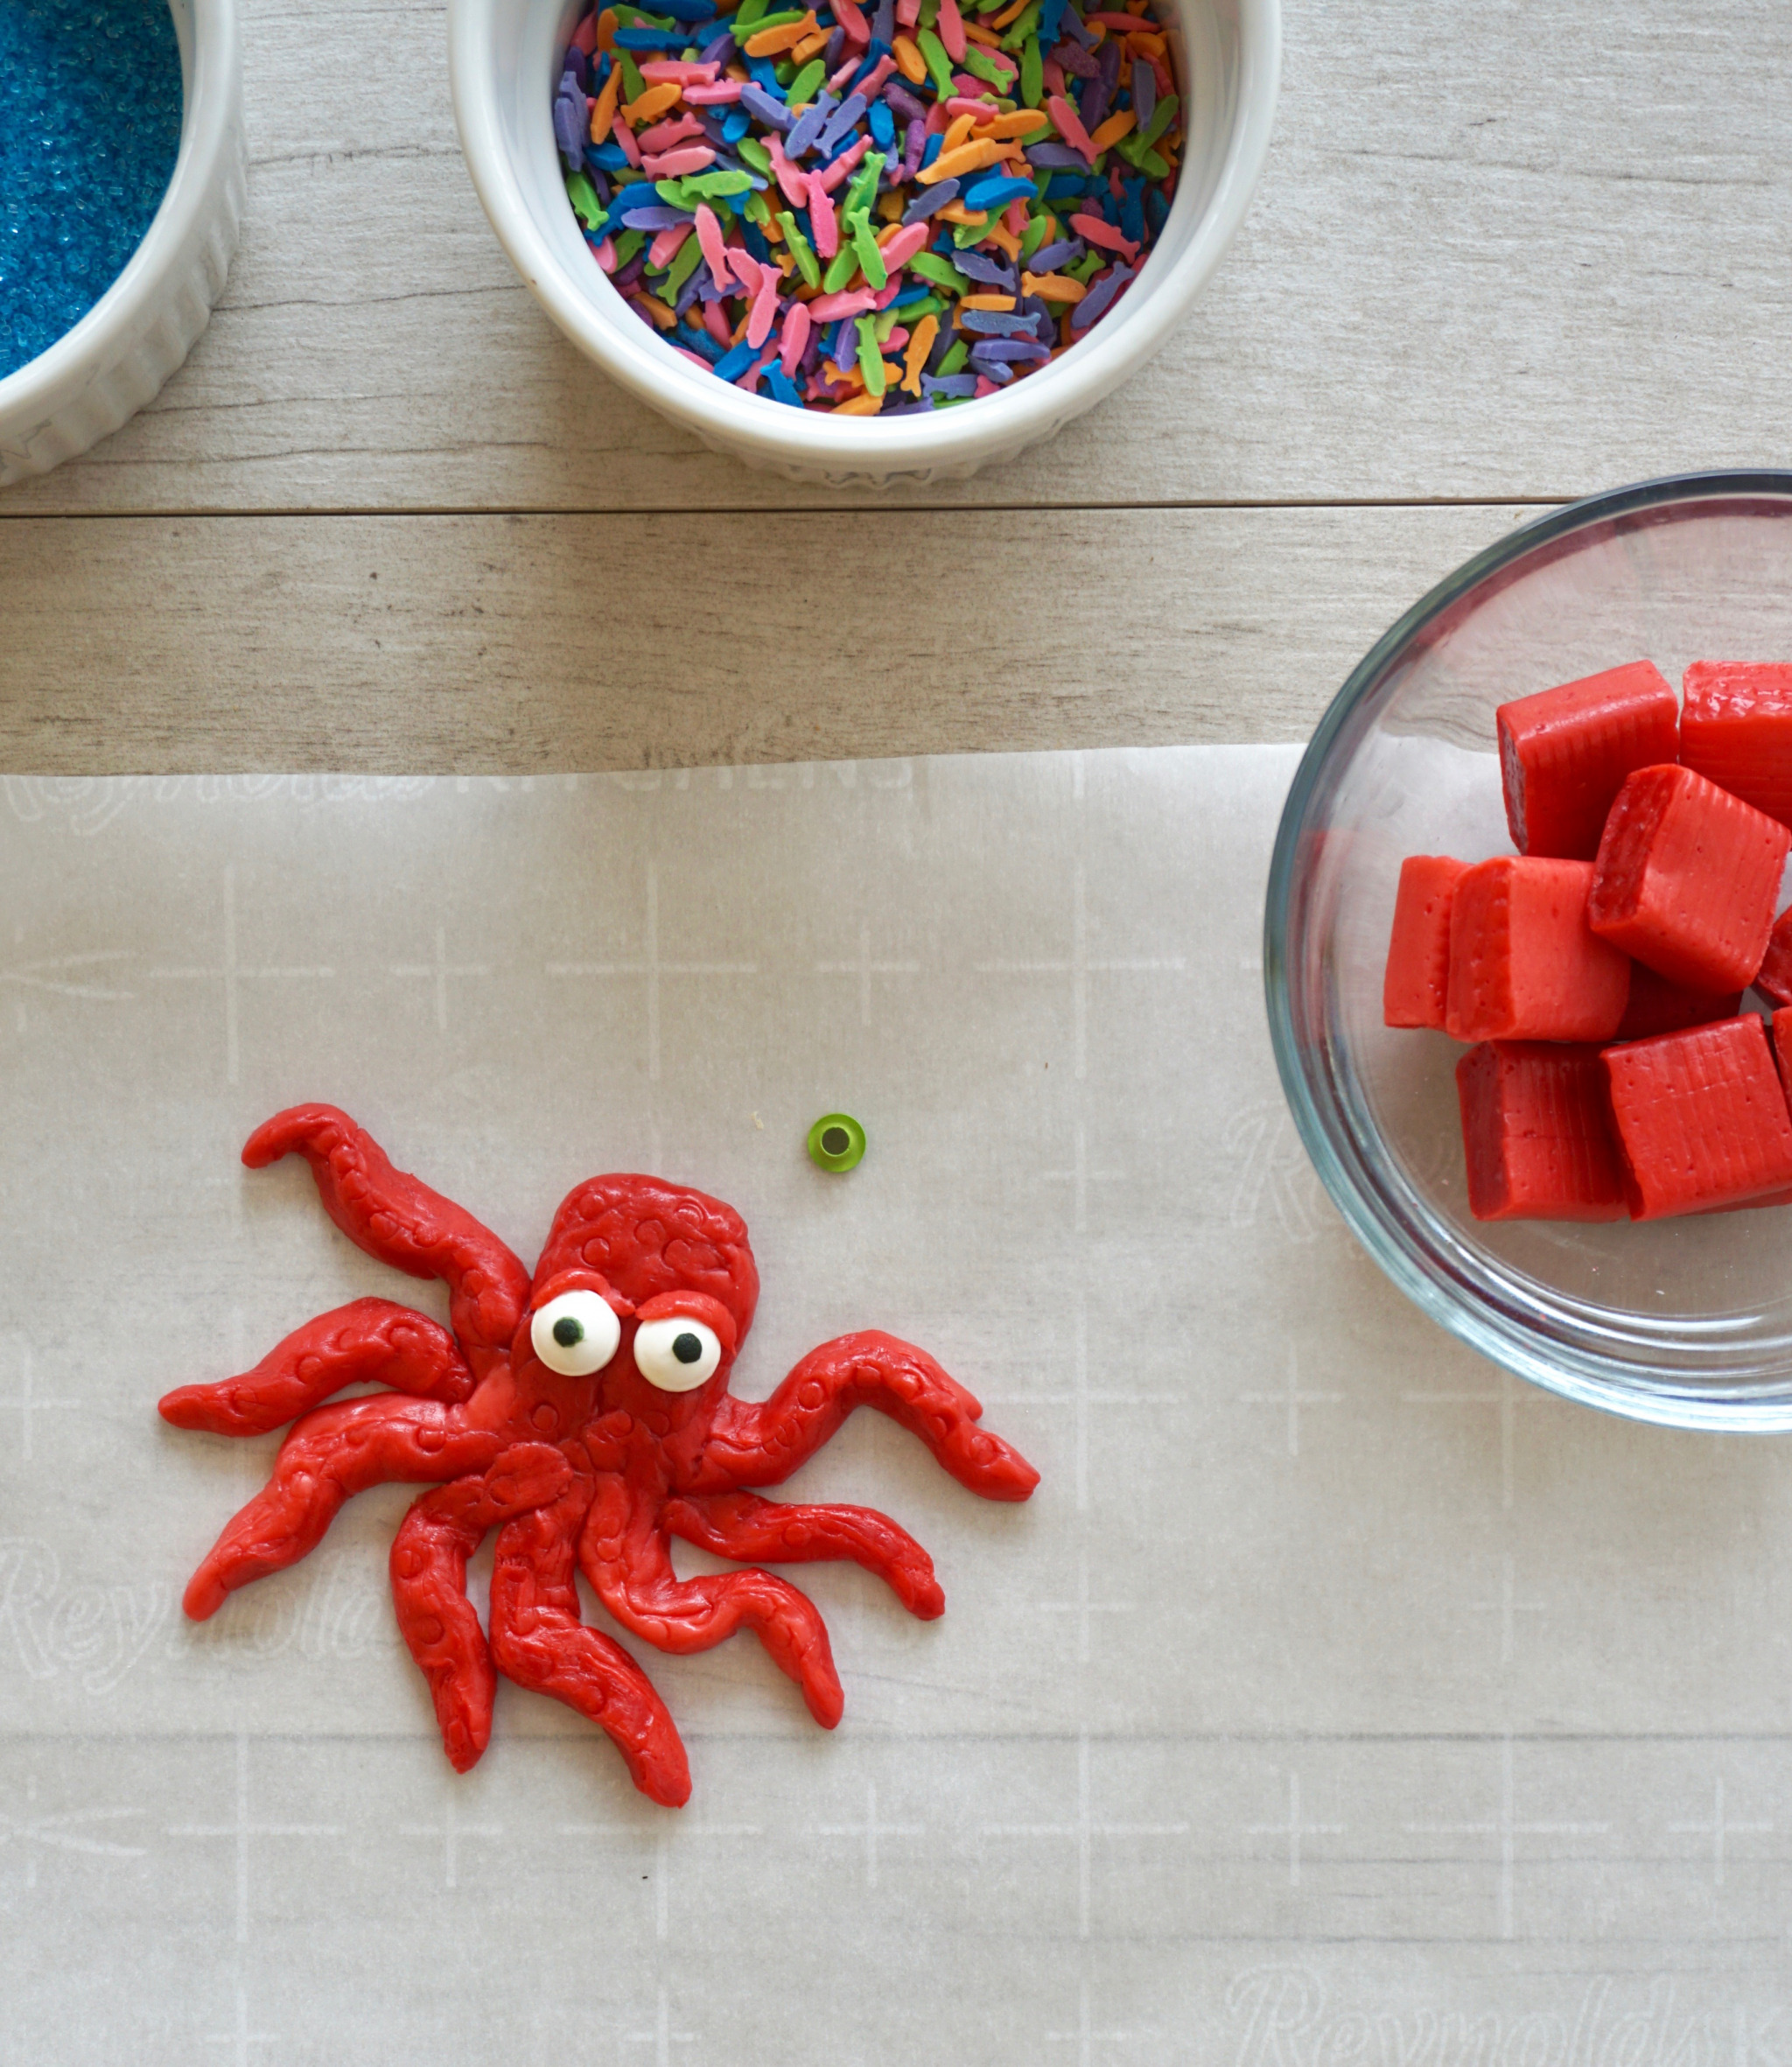 Octopus made with starburst candy